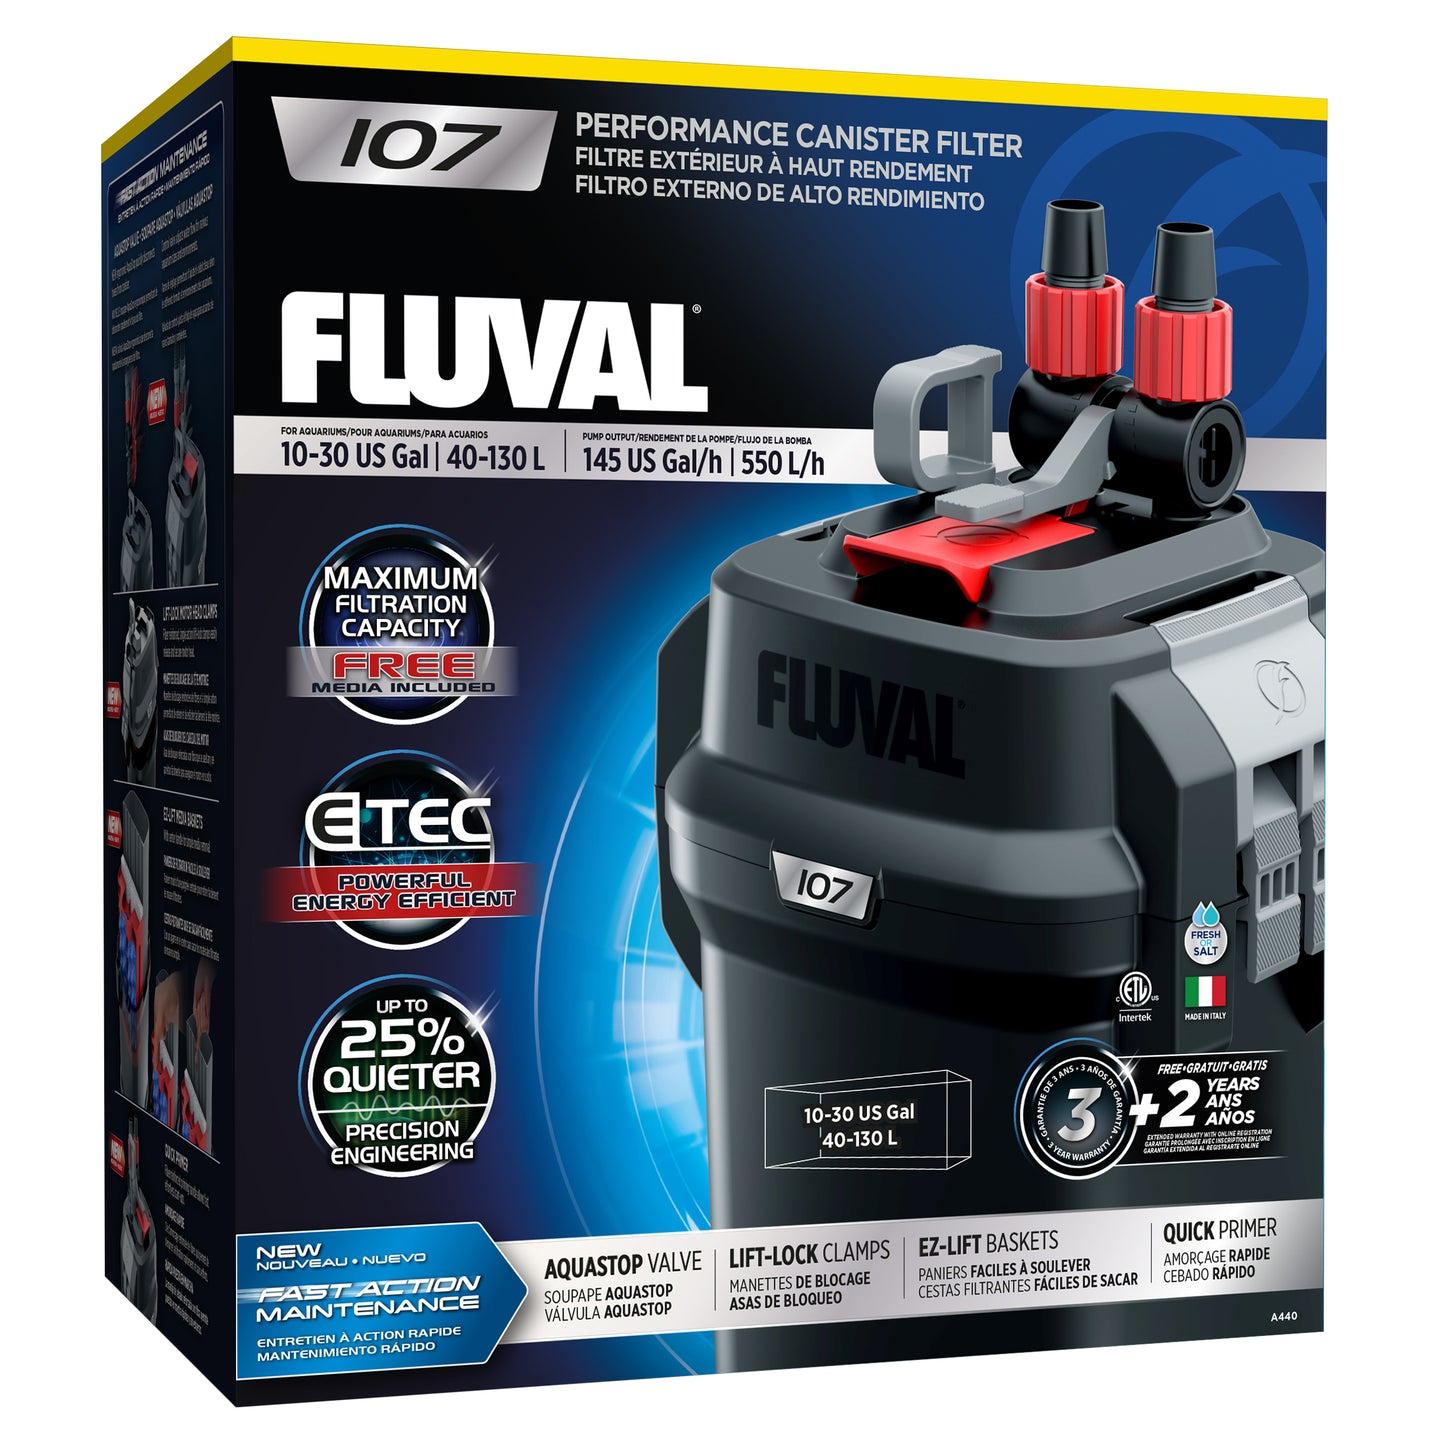 Fluval 107 Performance Canister Filter, up to 130 L (30 US gal)